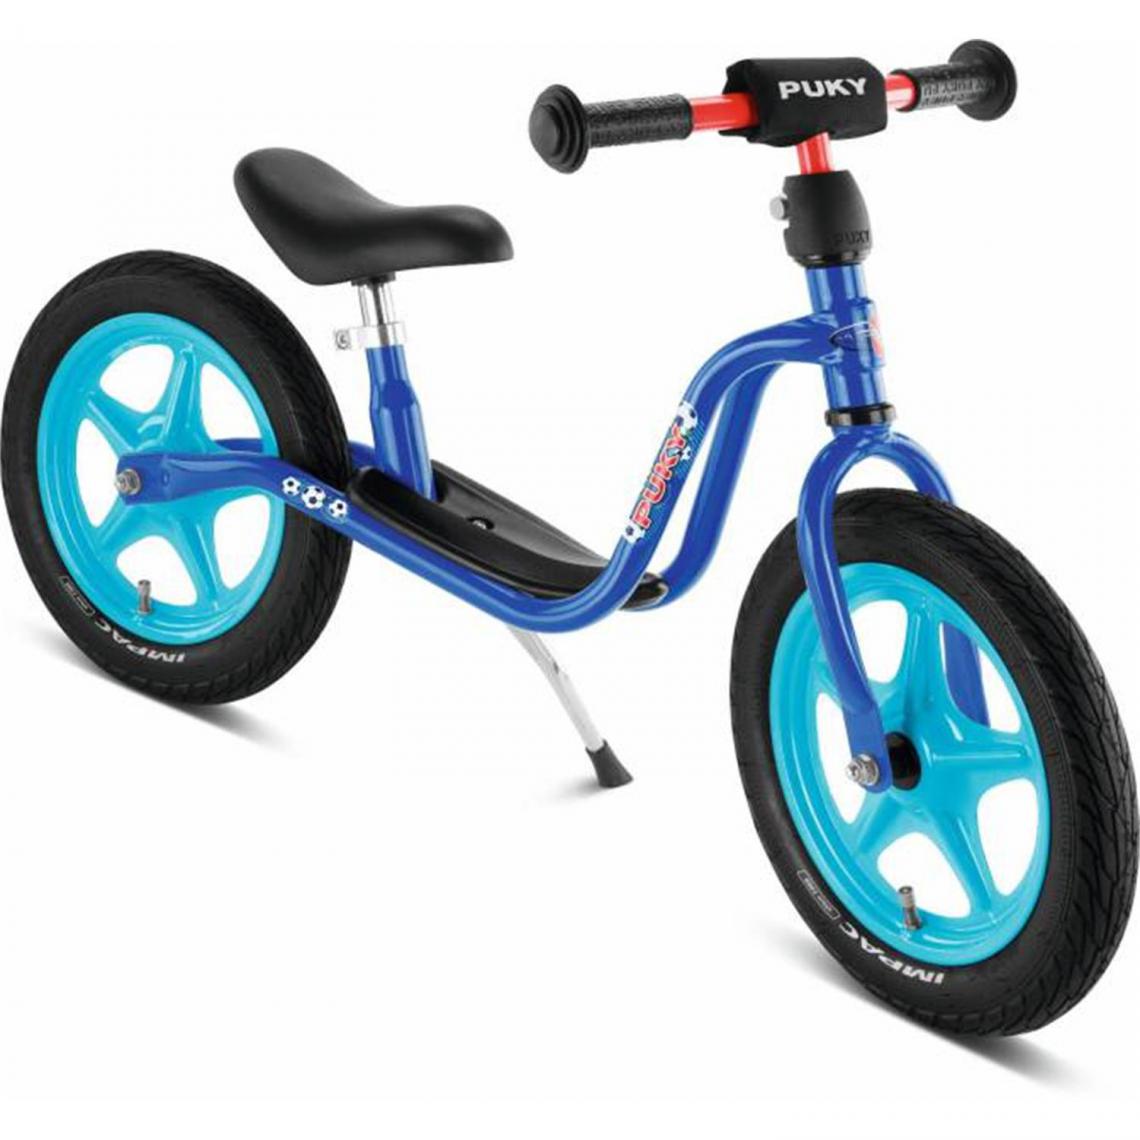 PUKY - Puky 4001 - Draisienne bleue - 3 ans + - Tricycle